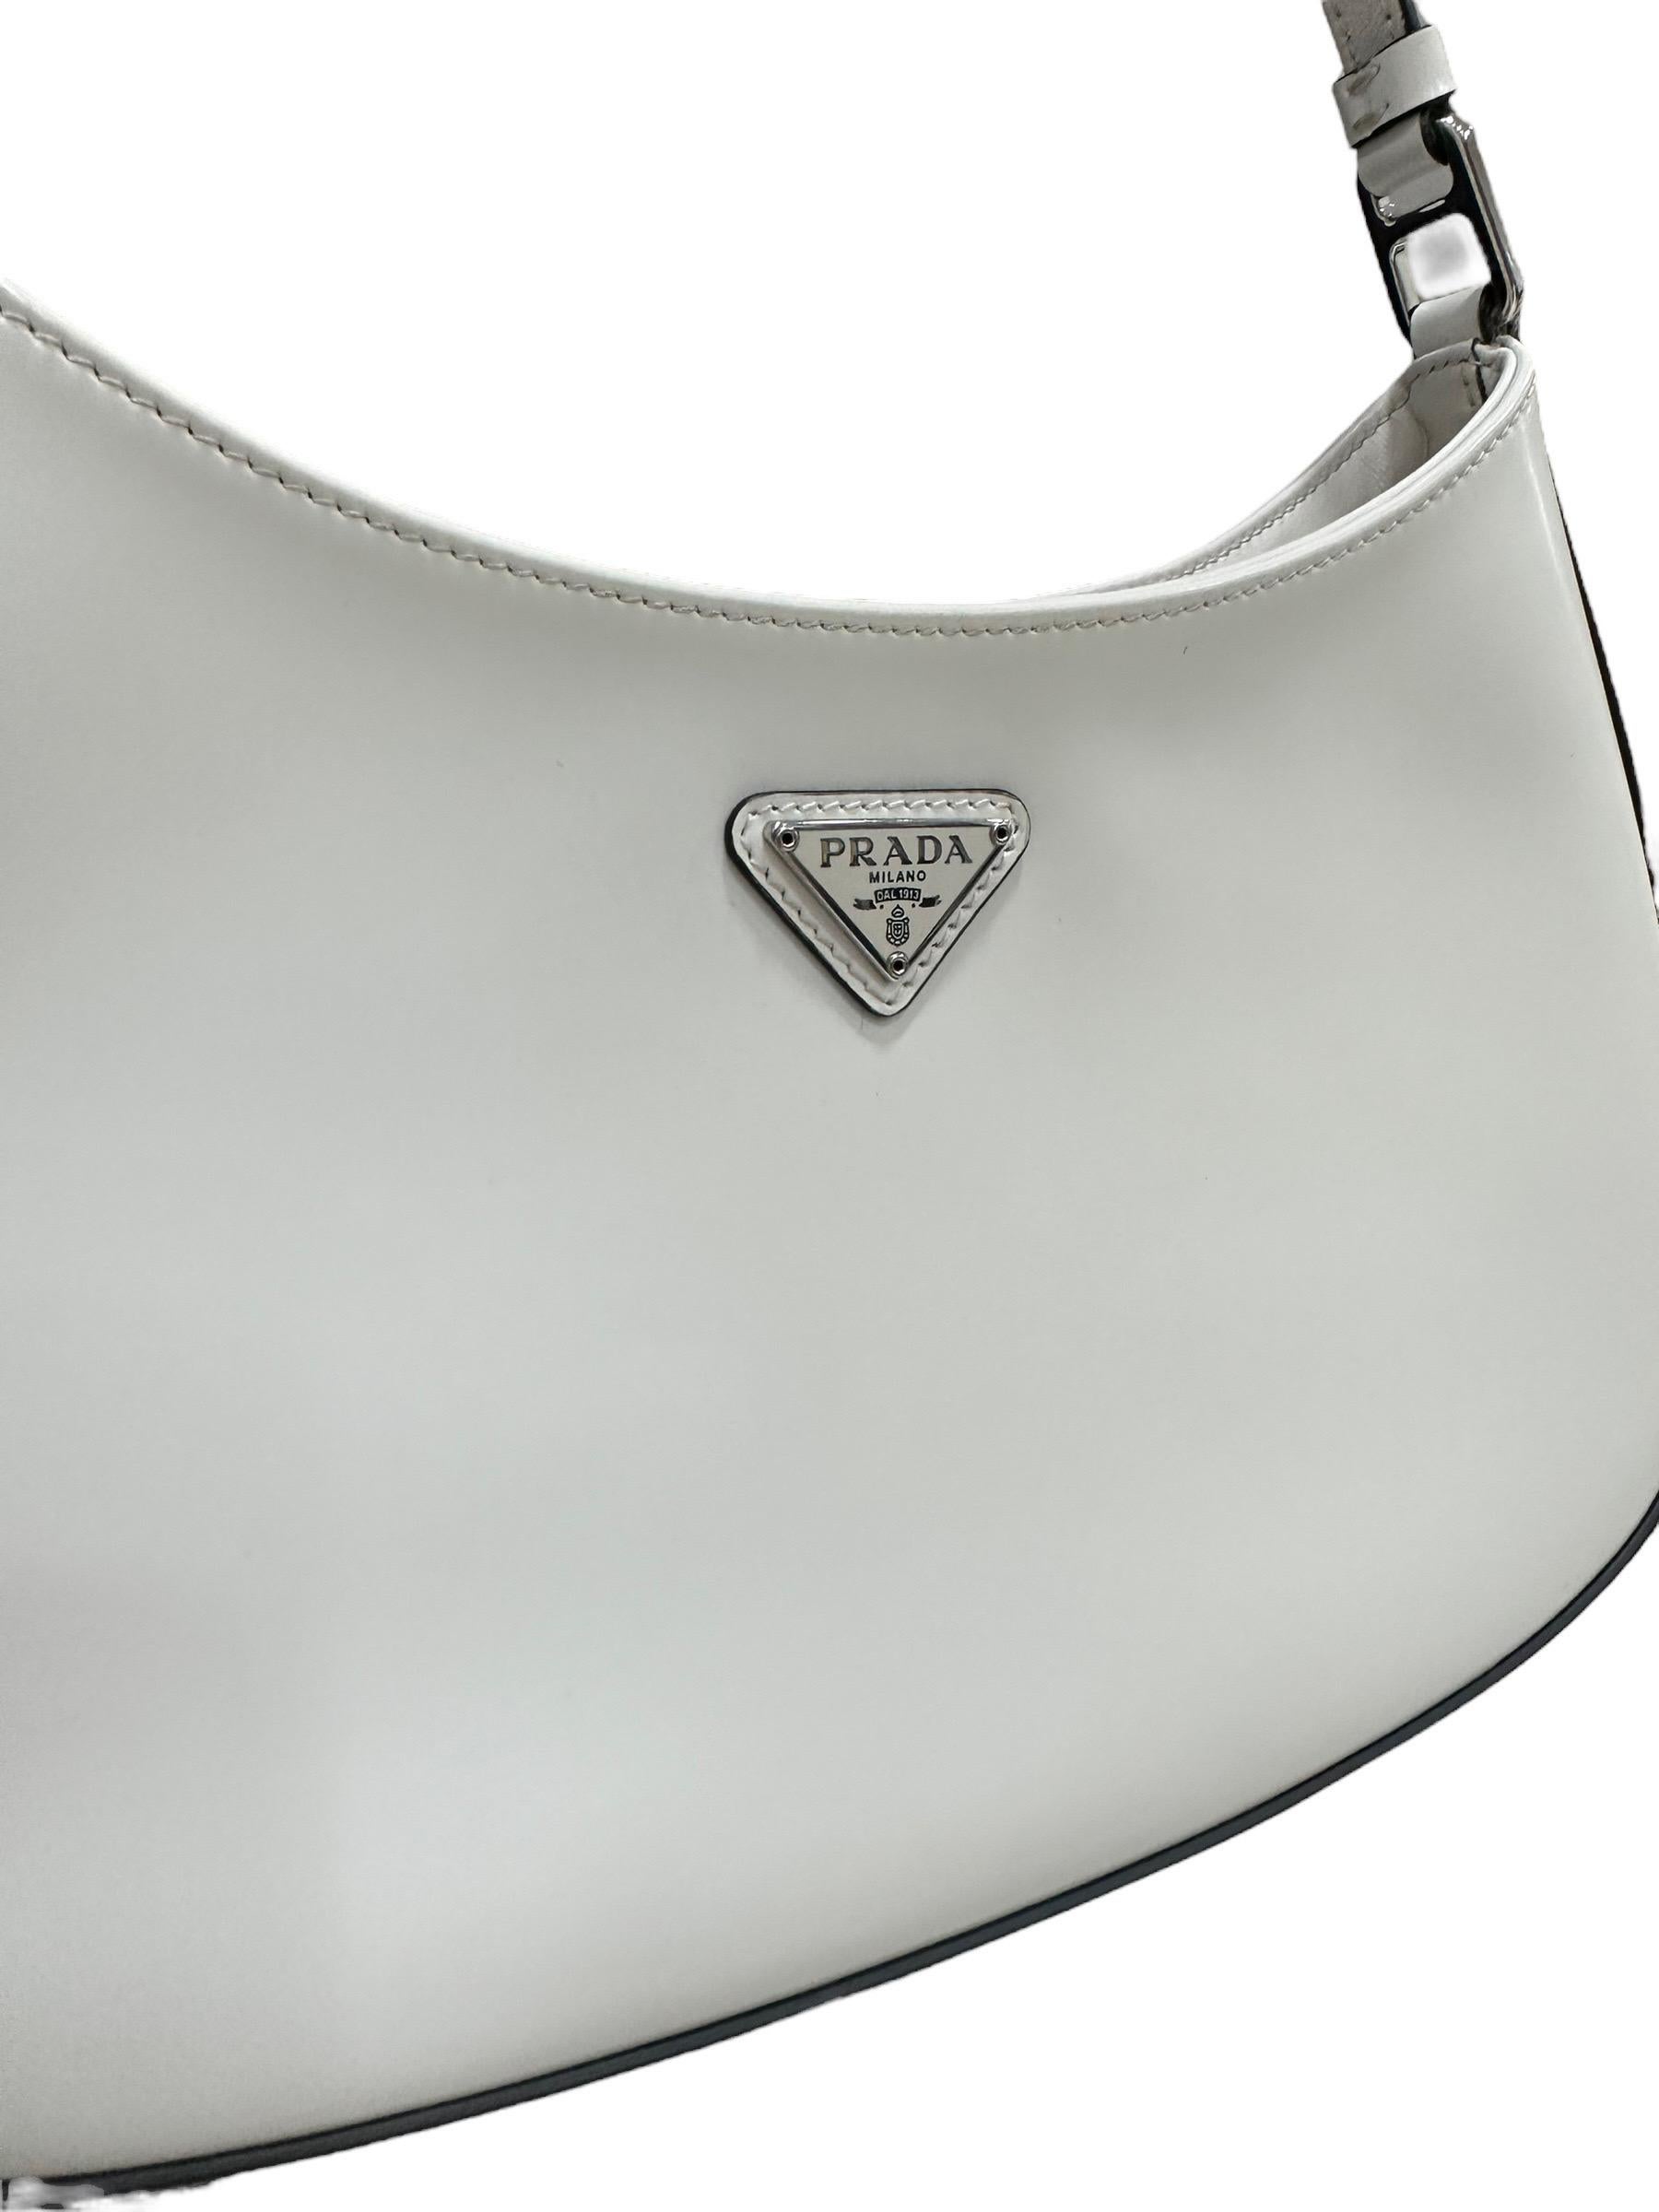 Prada shoulder bag, Cleo model, made of white brushed leather, with black leather trim and silver hardware. Equipped with an internal magnetic button closure, covered in black fabric, roomy for the essentials. Fitted with a non-adjustable top handle